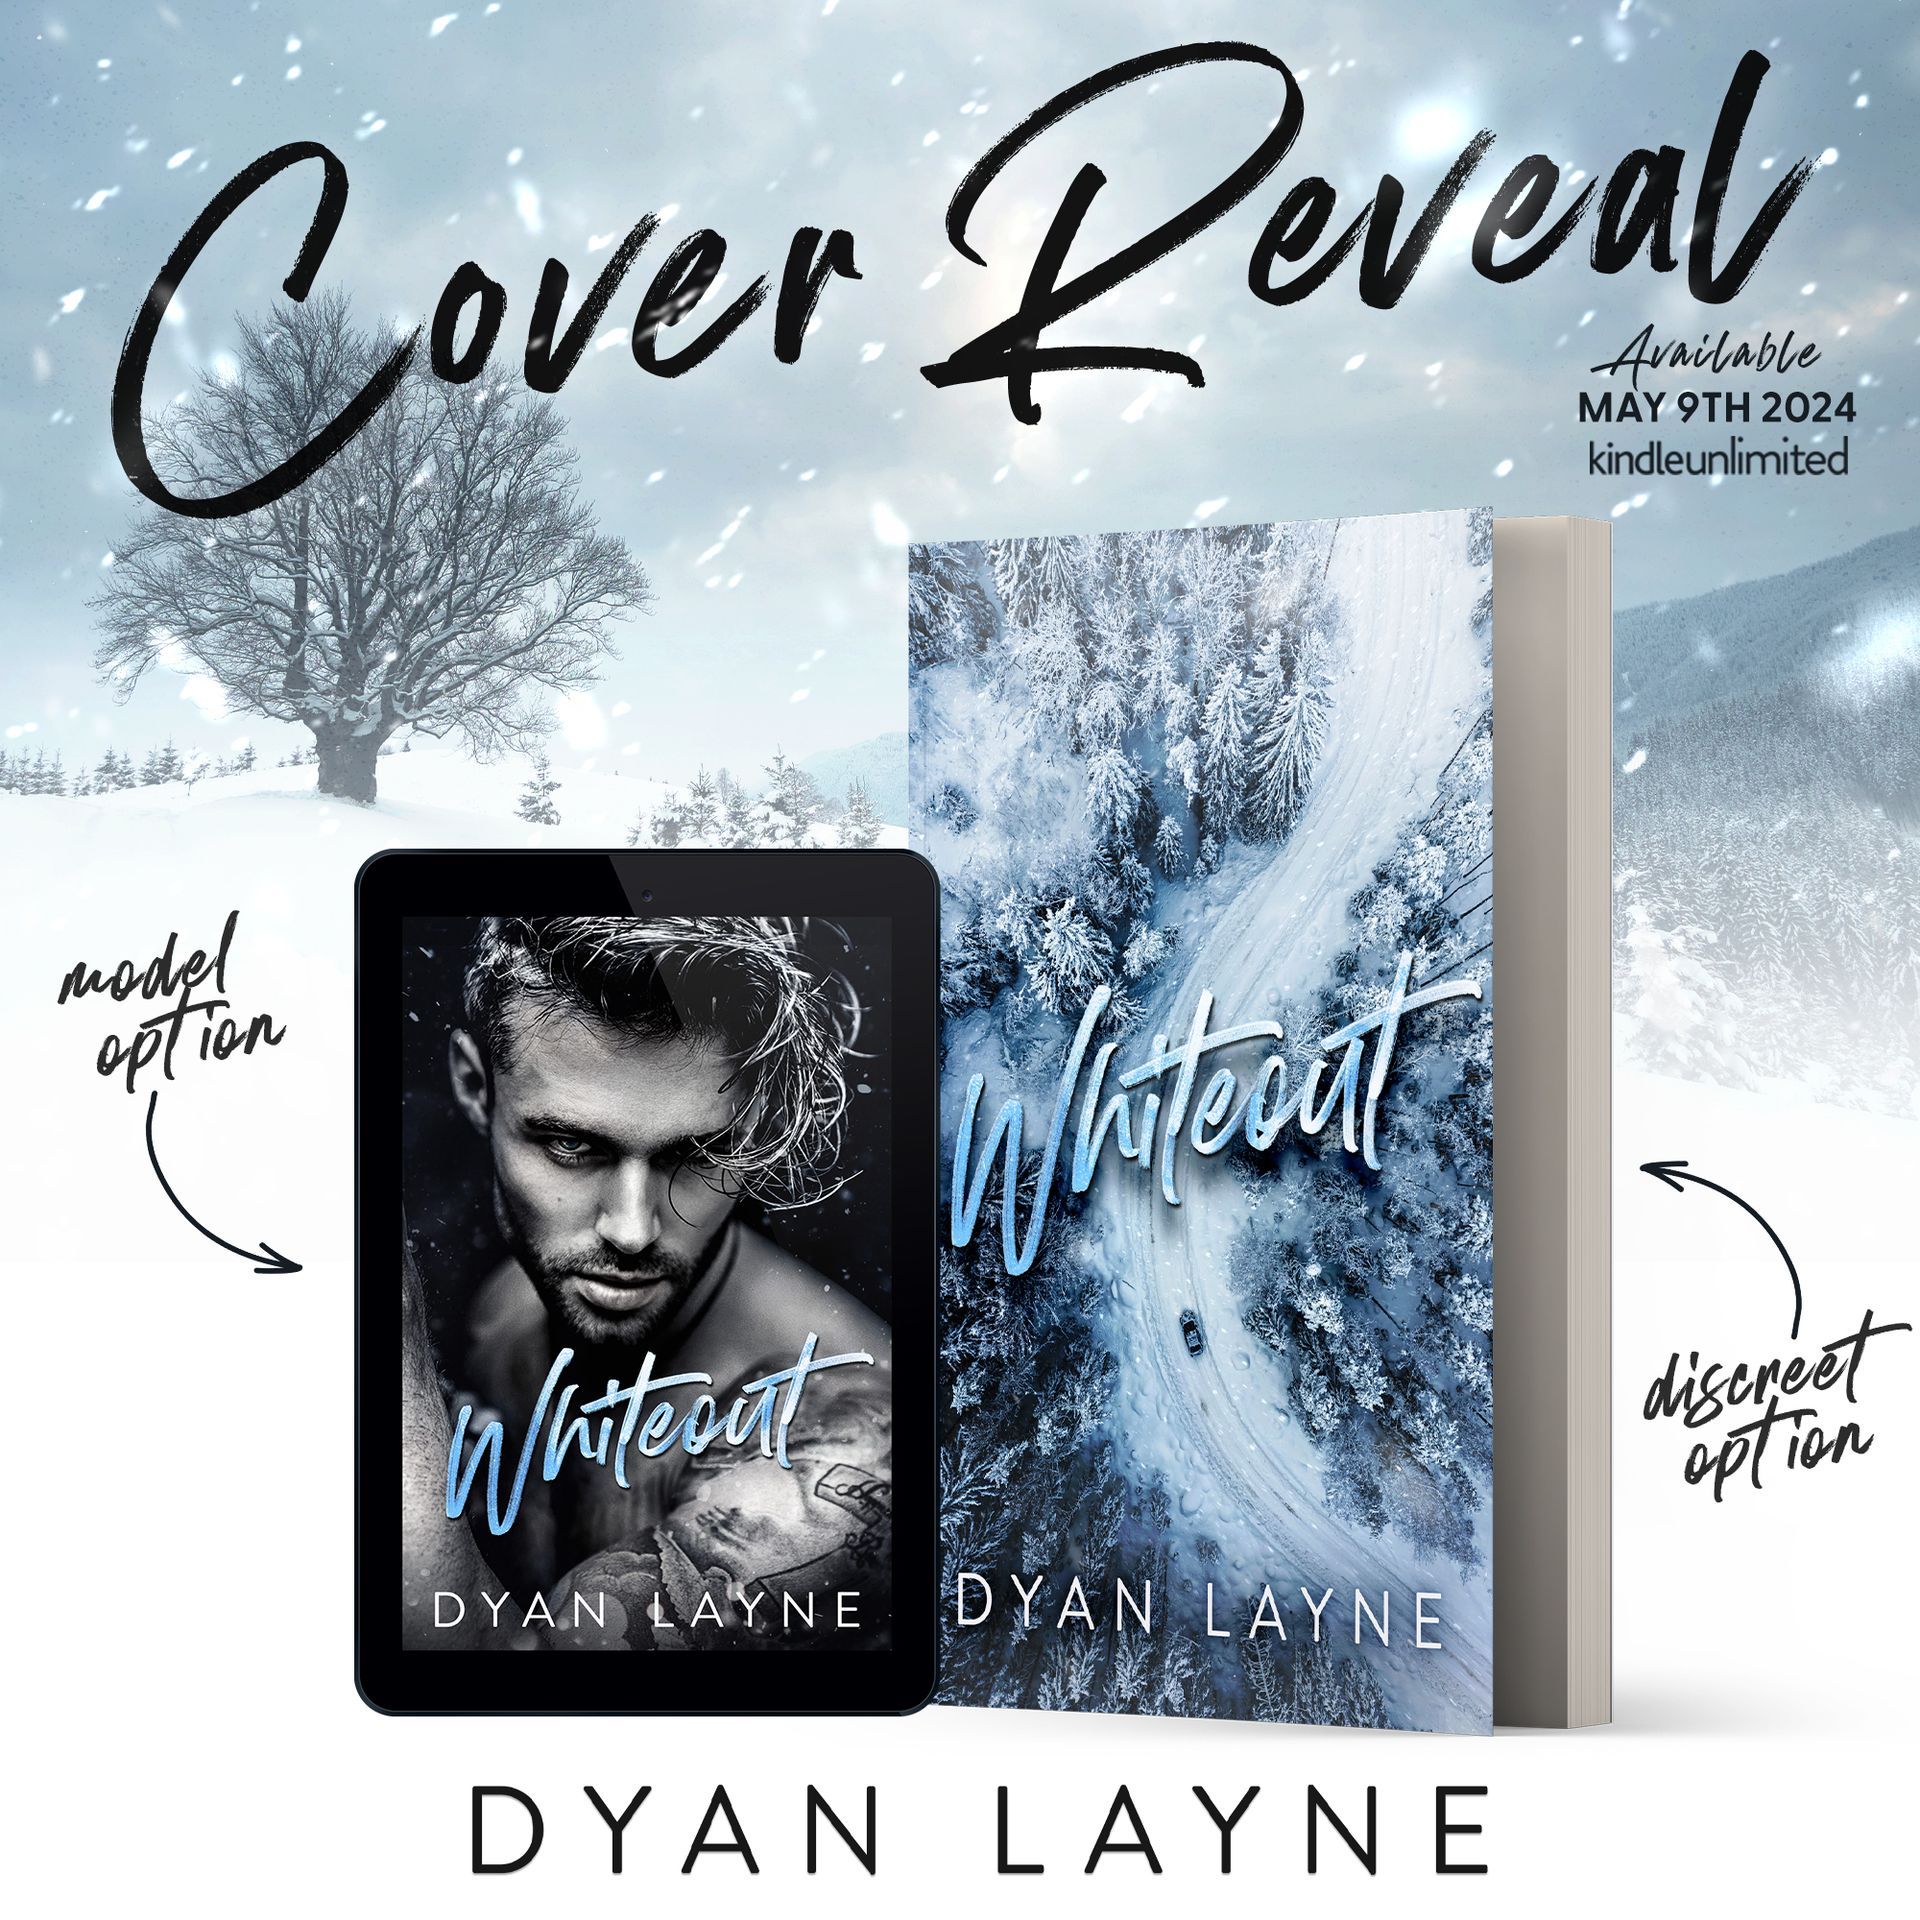 A cover reveal for a book by dyan layne